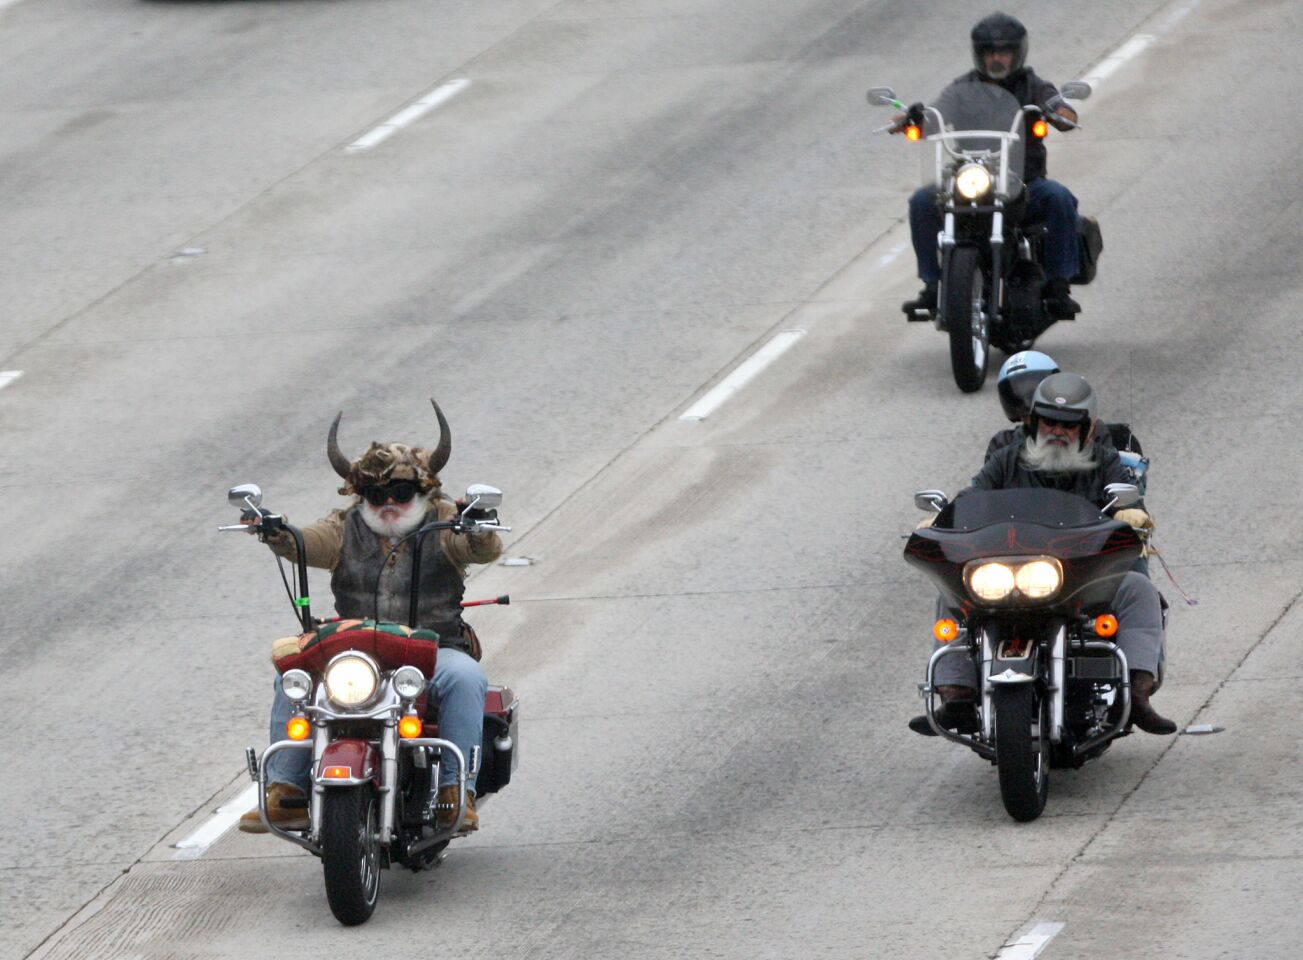 Wolf, from Sacramento, left, rides north of the Glendale Freeway towards the Foothill Freeway in the 32nd annual Love Ride event that began at Harley-Davidson Motorcycles in Glendale on Sunday, October 18, 2015. This will be the last fundraising Love Ride.